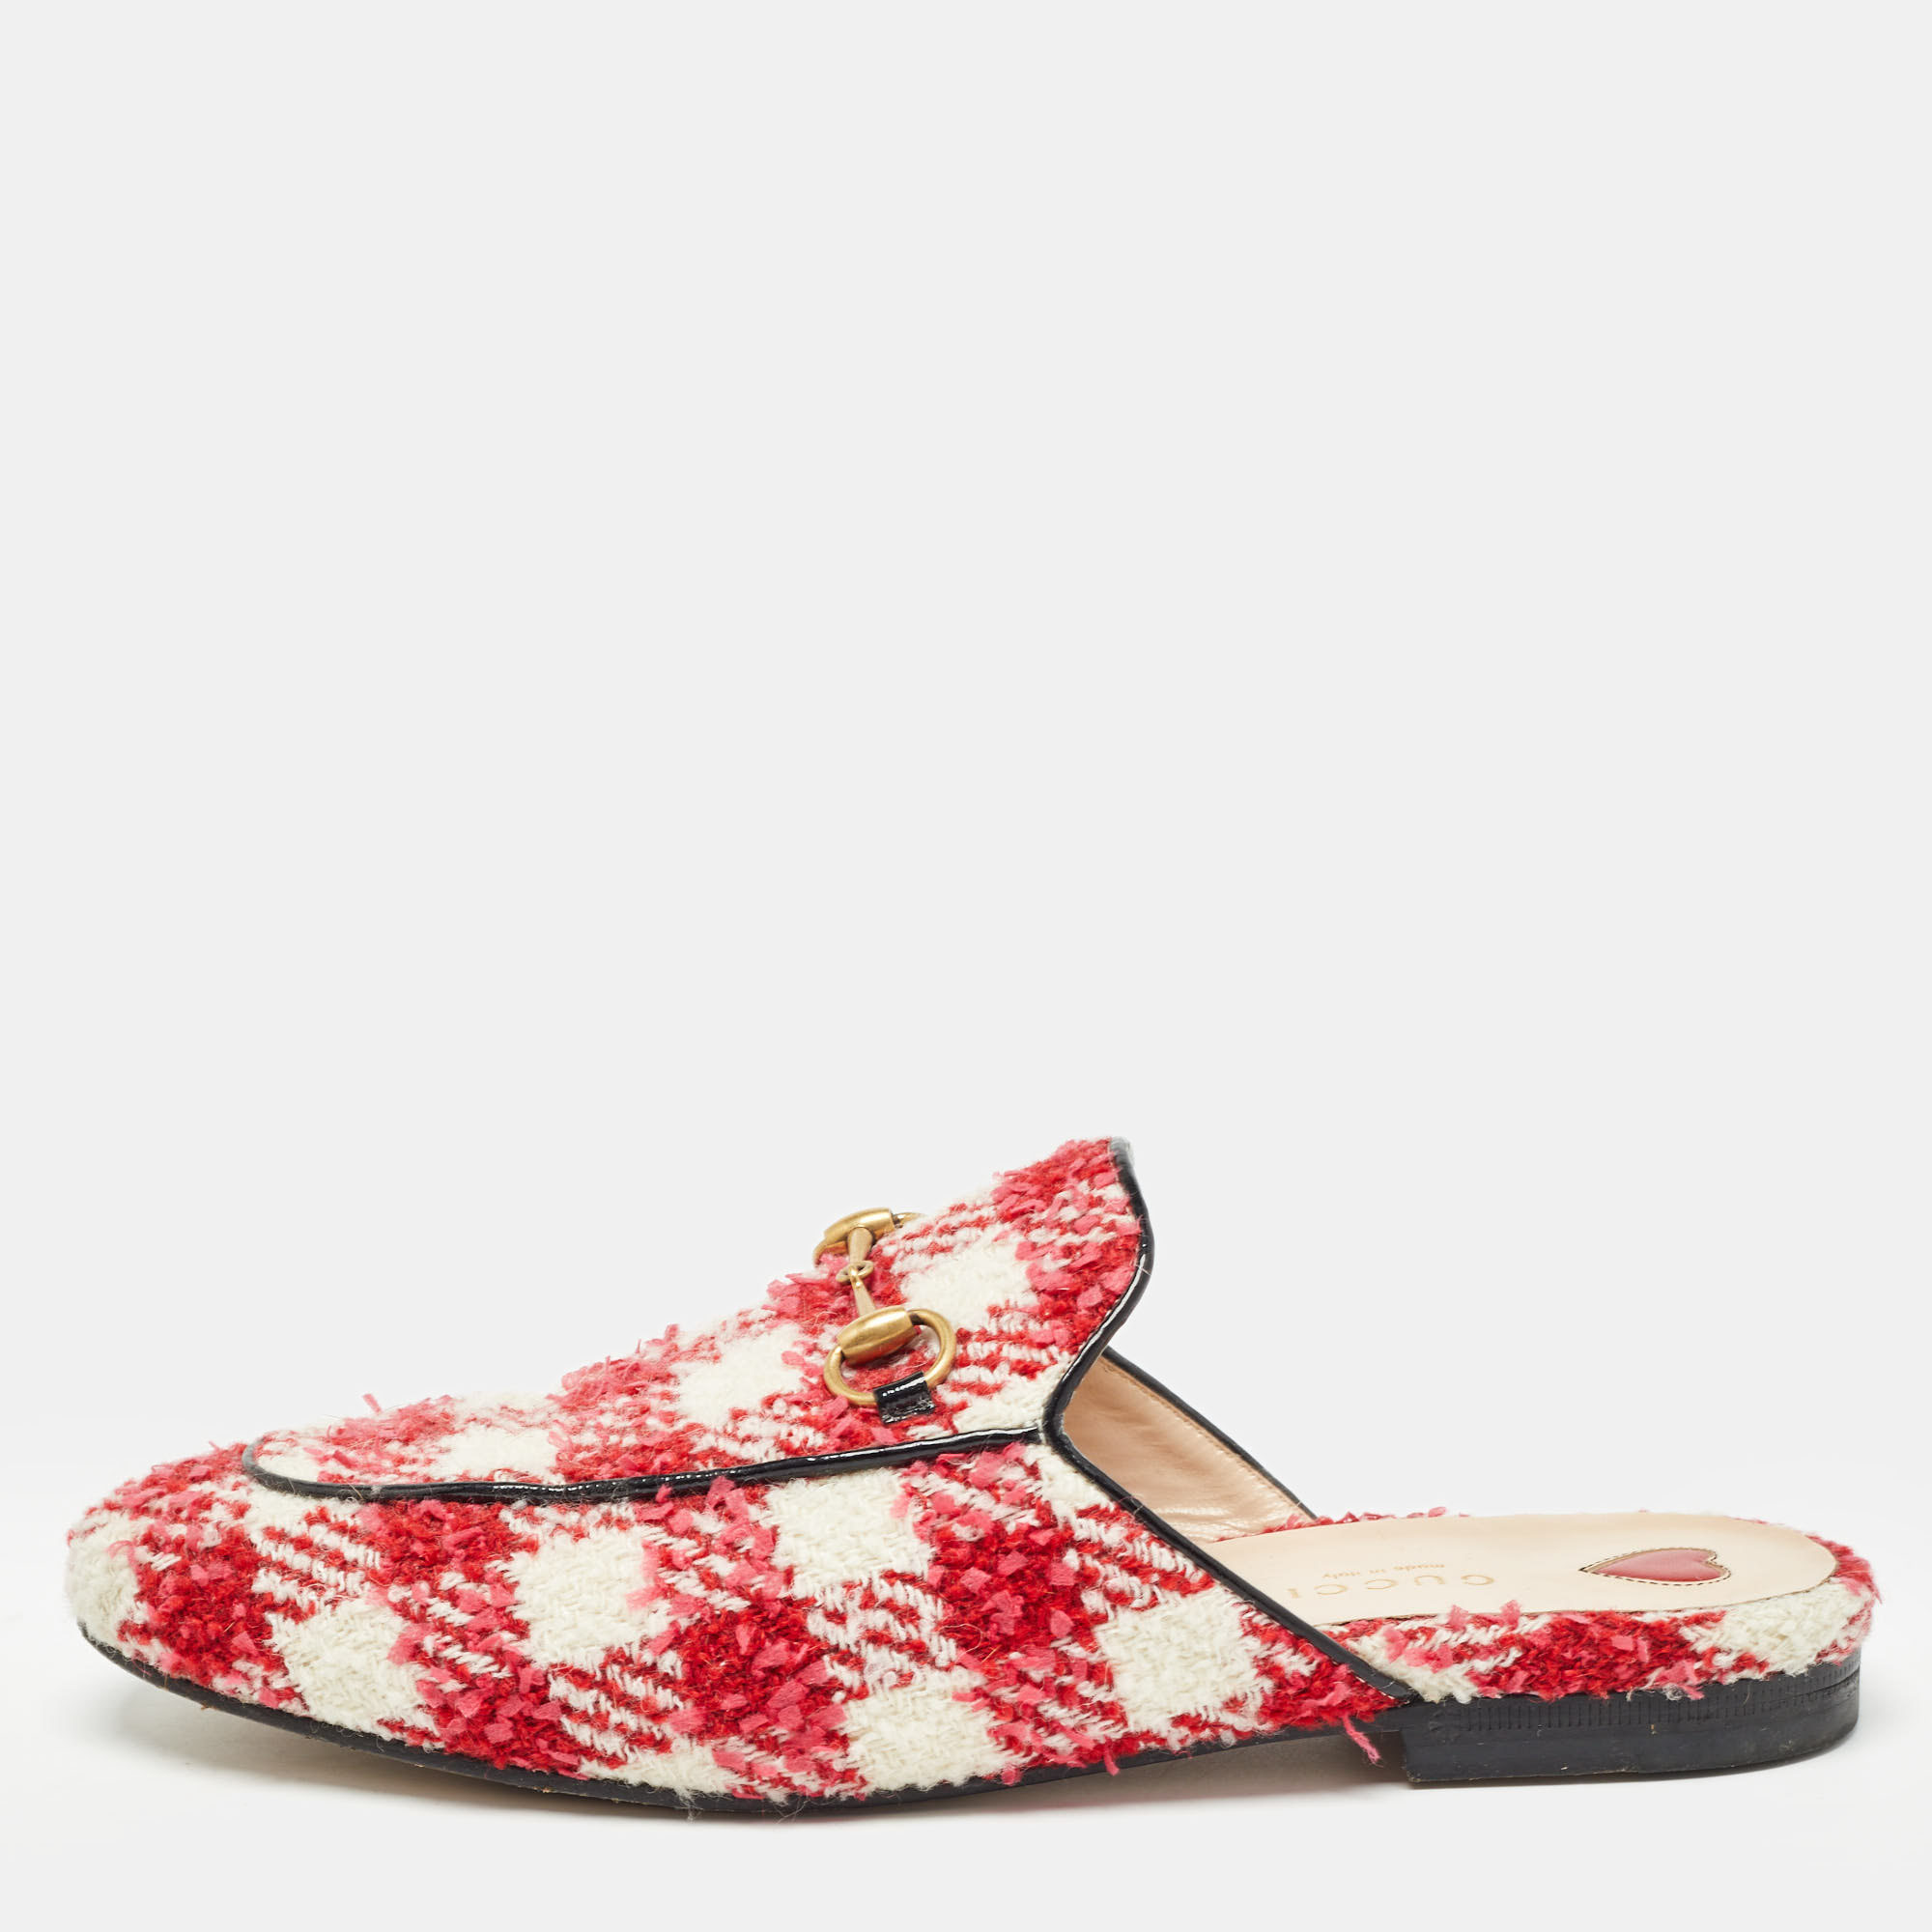 Gucci red/white tweed princetown  mules size 38.5